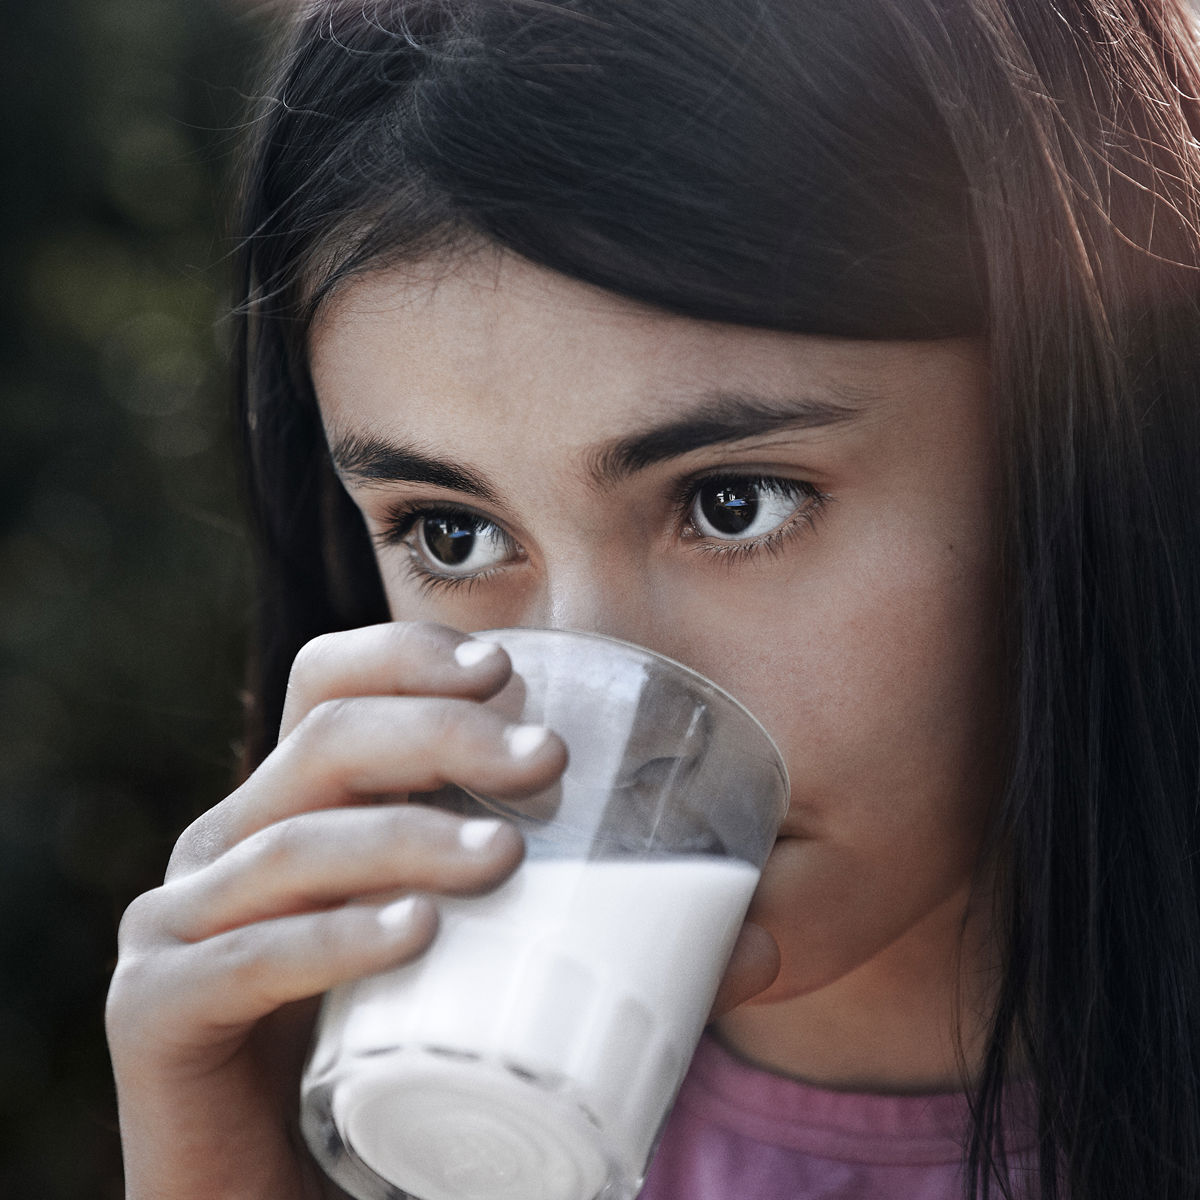 A girl drinking a glass of milk